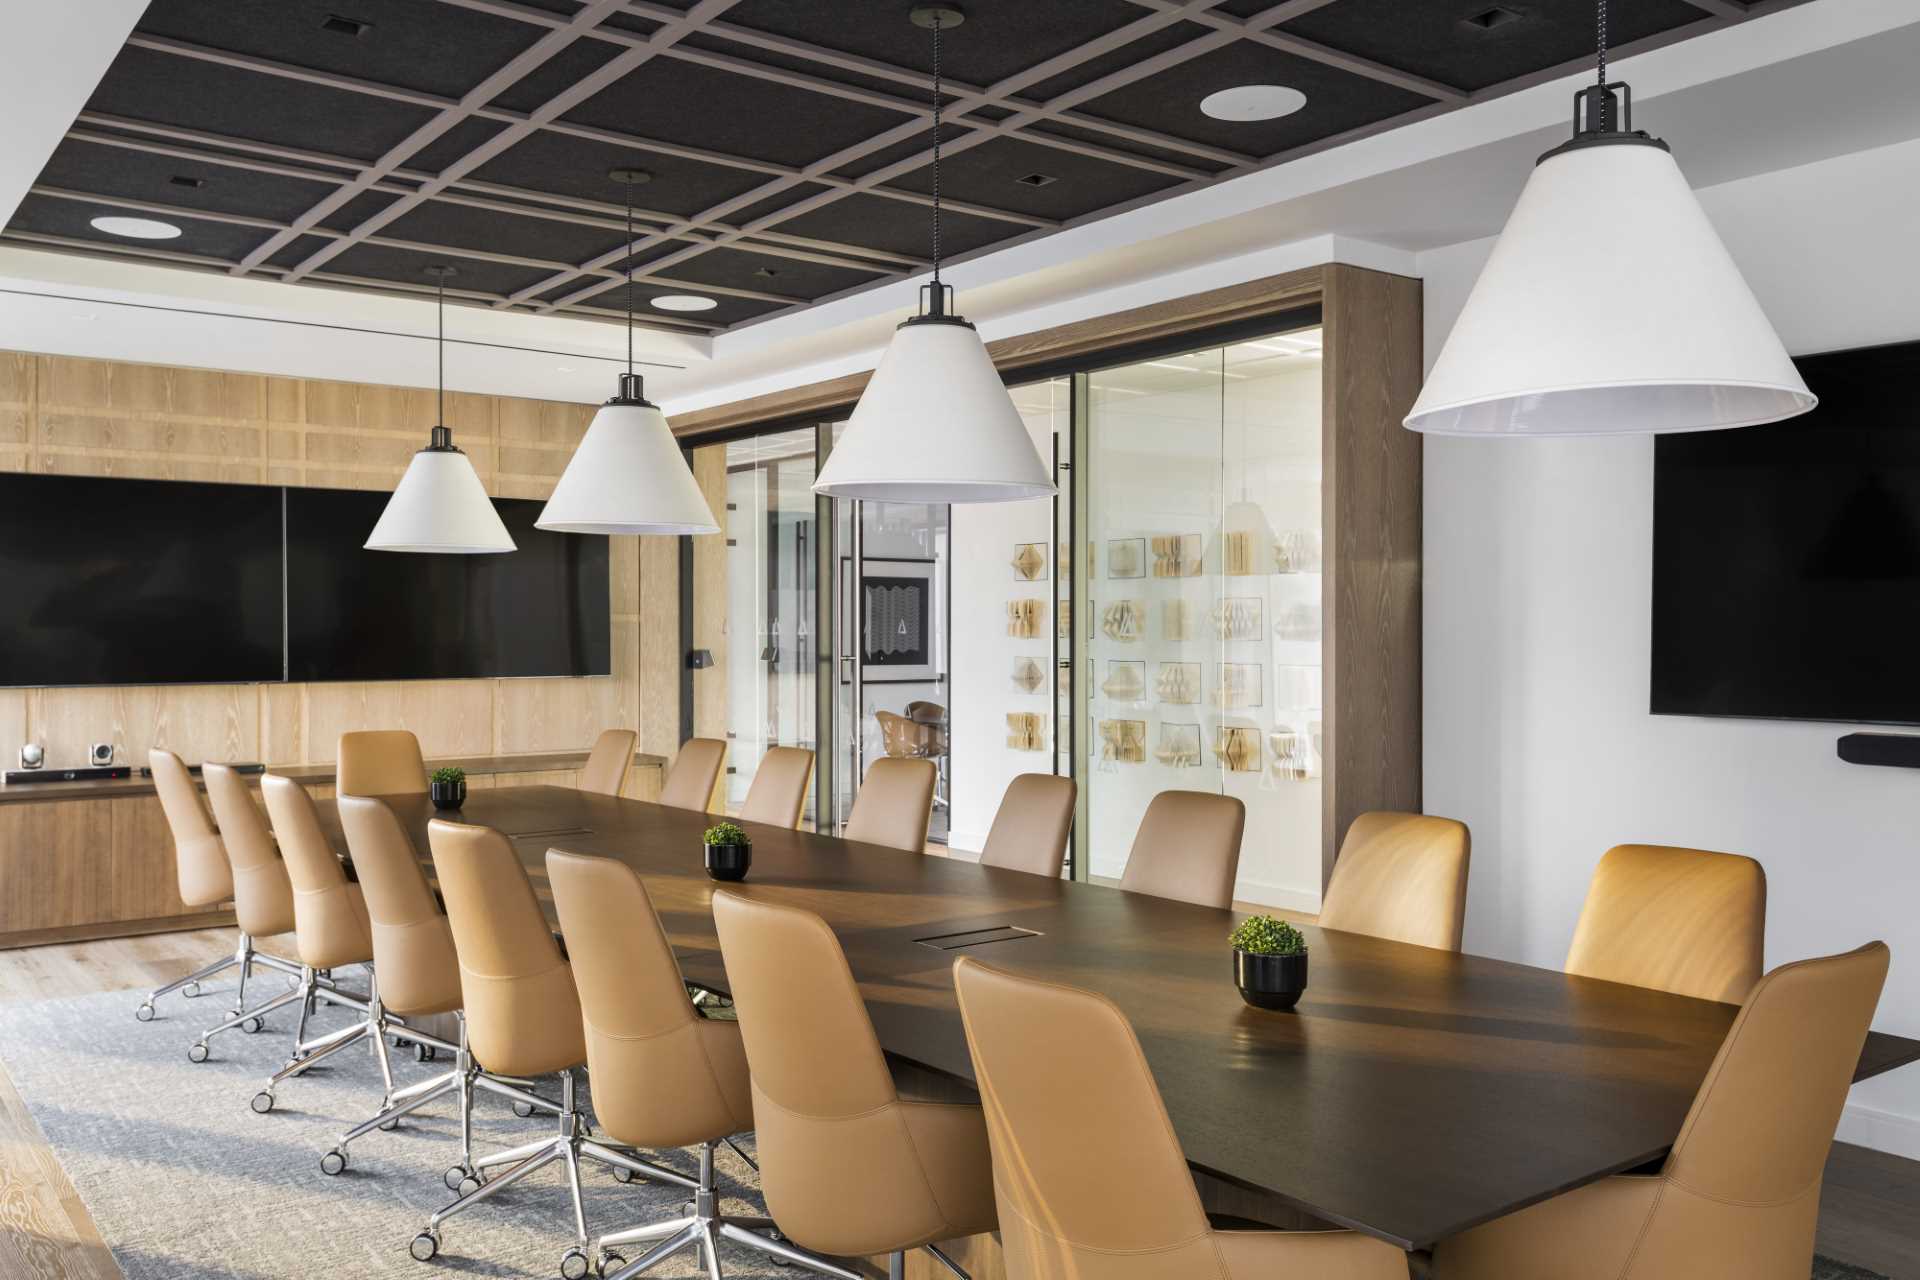 A modern meeting room with a plaid-inspired wood accent wall.